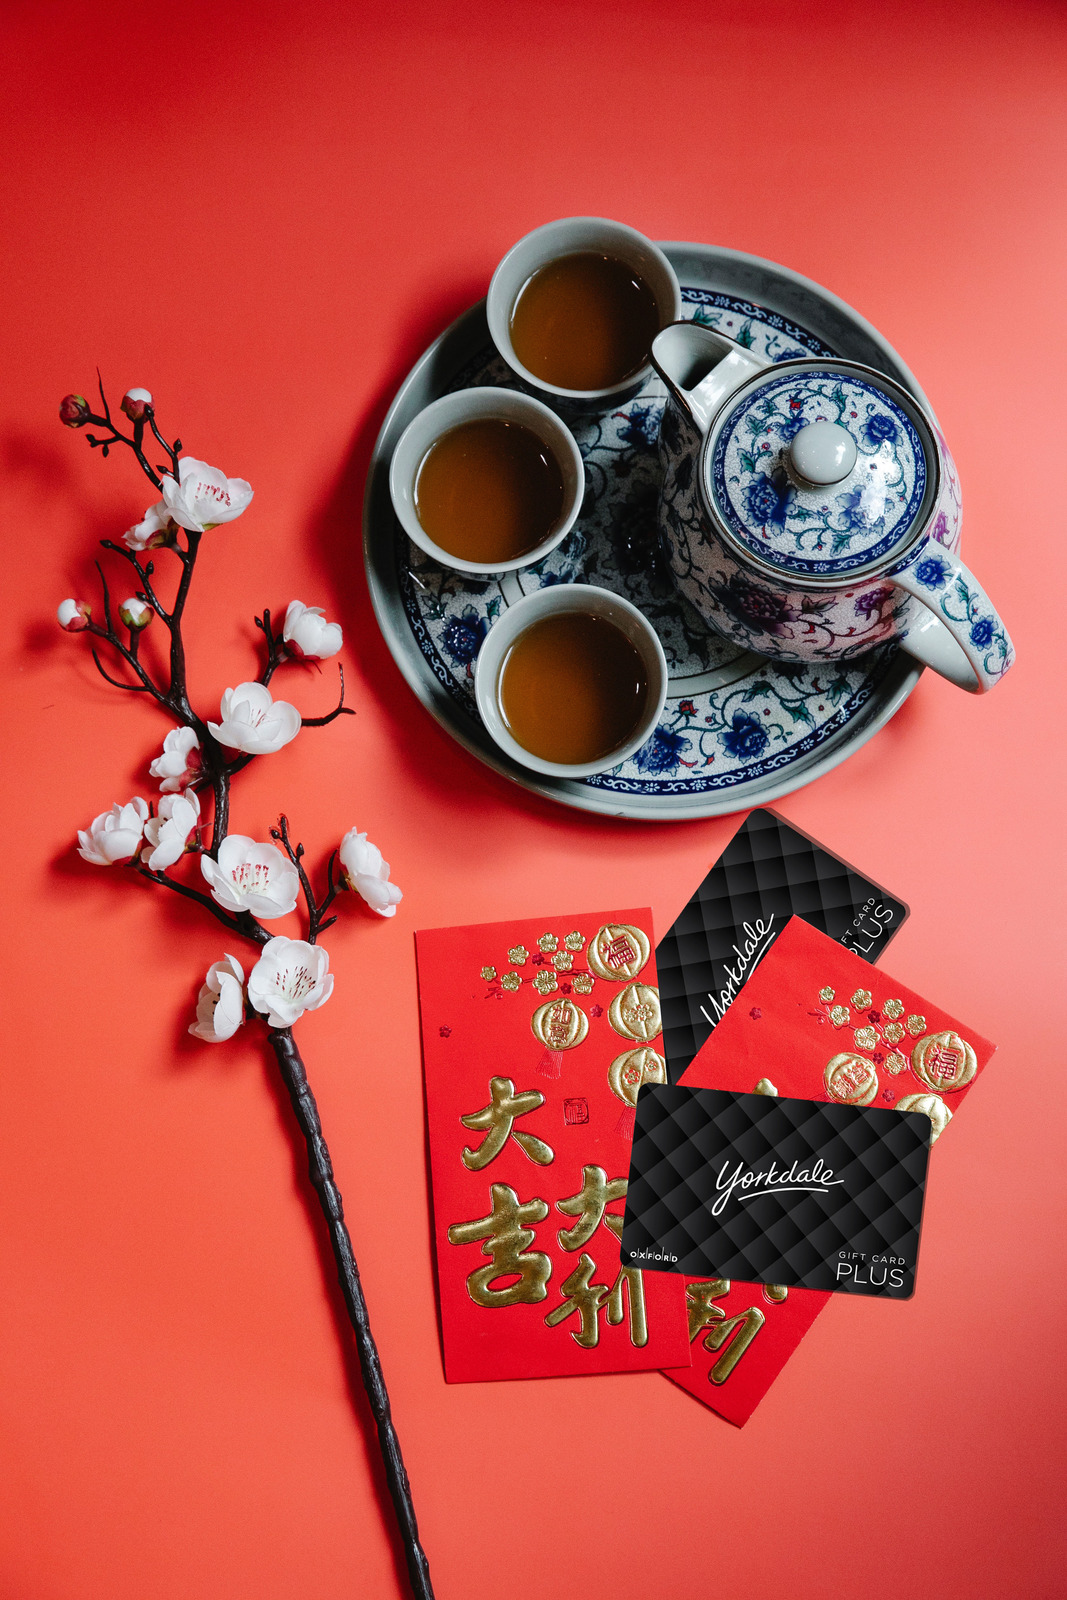 Flat lay image on a red backdrop featuring a tea seat, white florals, lucky red envelopes and a black Yorkdale gift card.